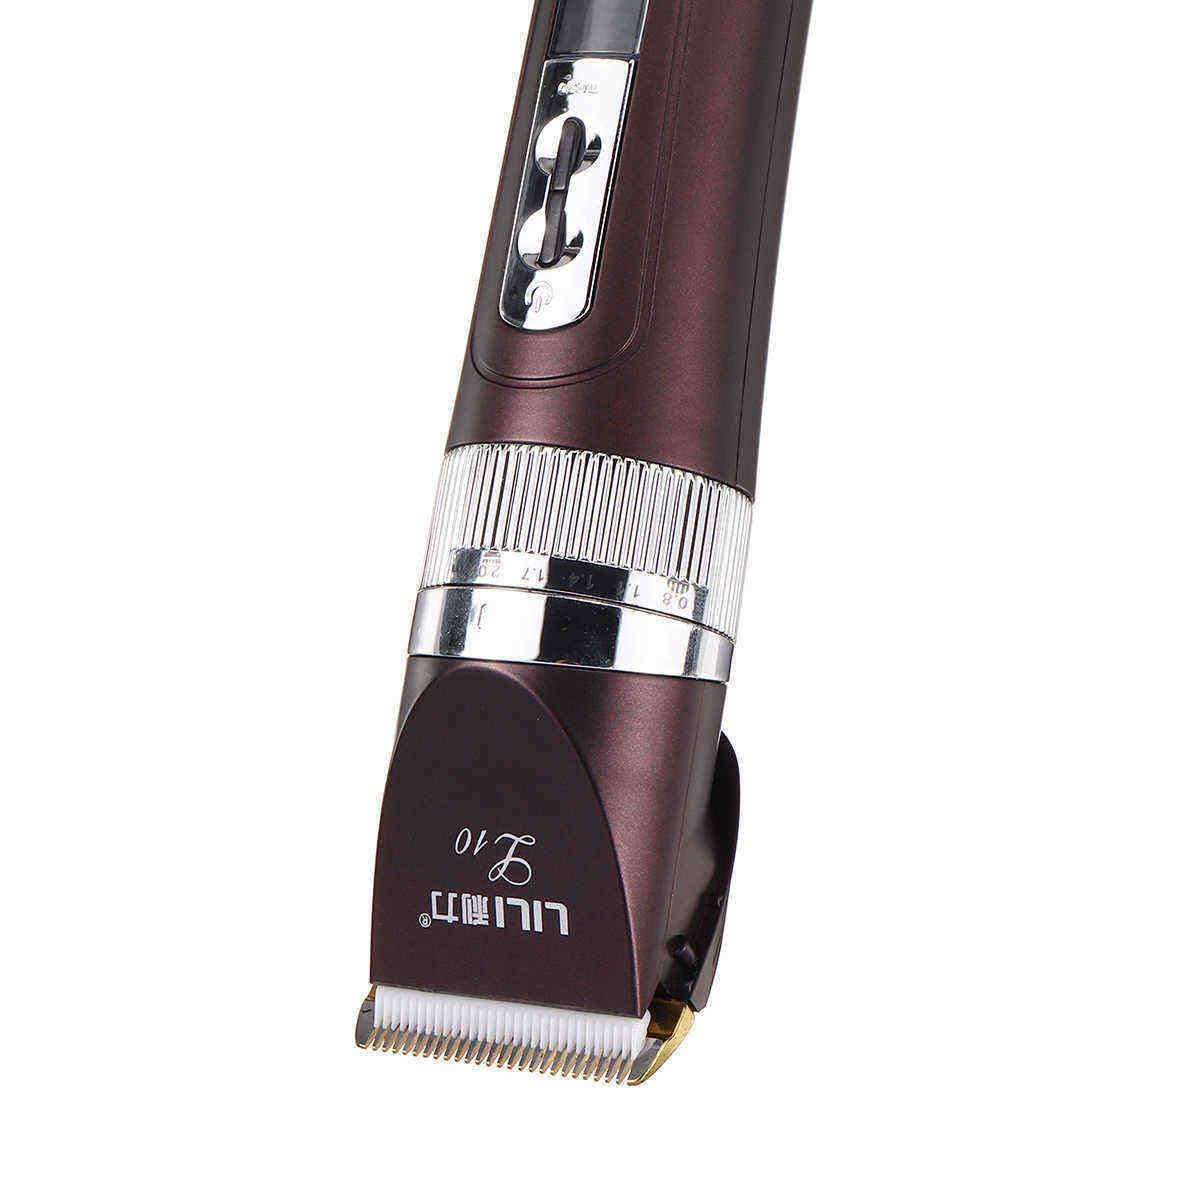 100-240V-Lcd-Display-Rechargeable-Professional-Hair-Clipper-Titianium-Cutter-Lithium-Battery-Hair-Tr-1463009